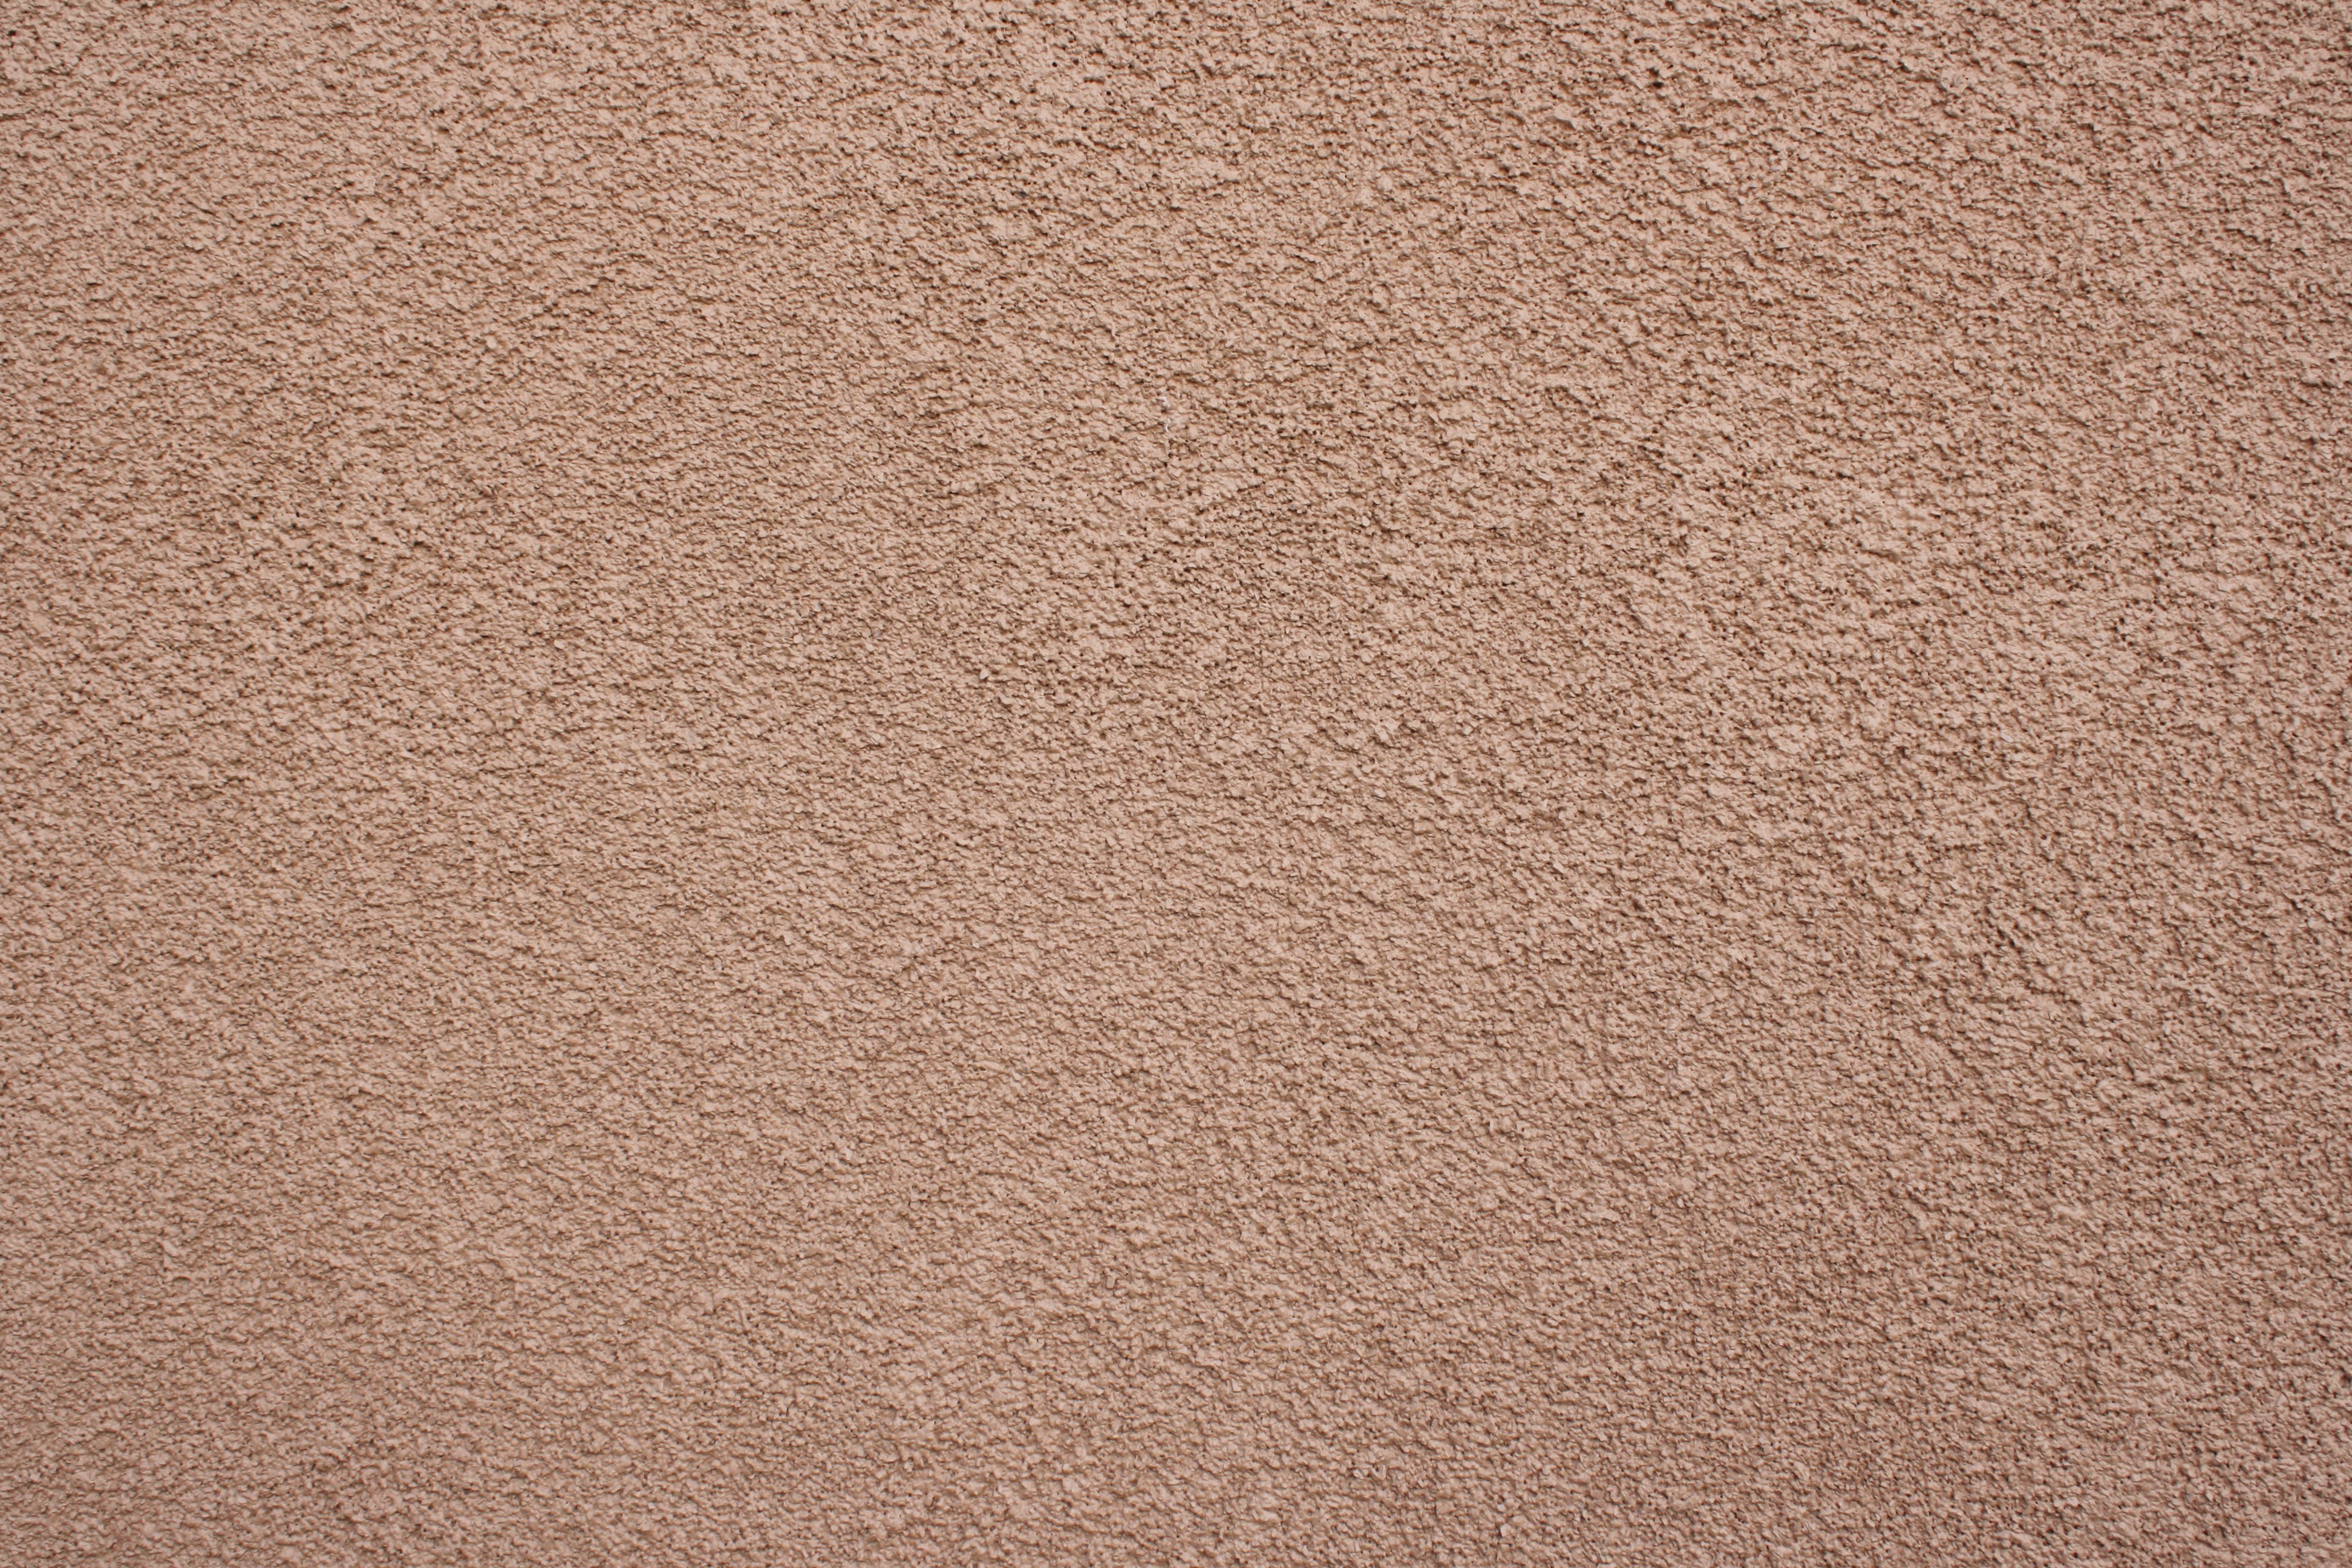 Tan Stucco Wall Texture Picture Free Photograph Photos Public